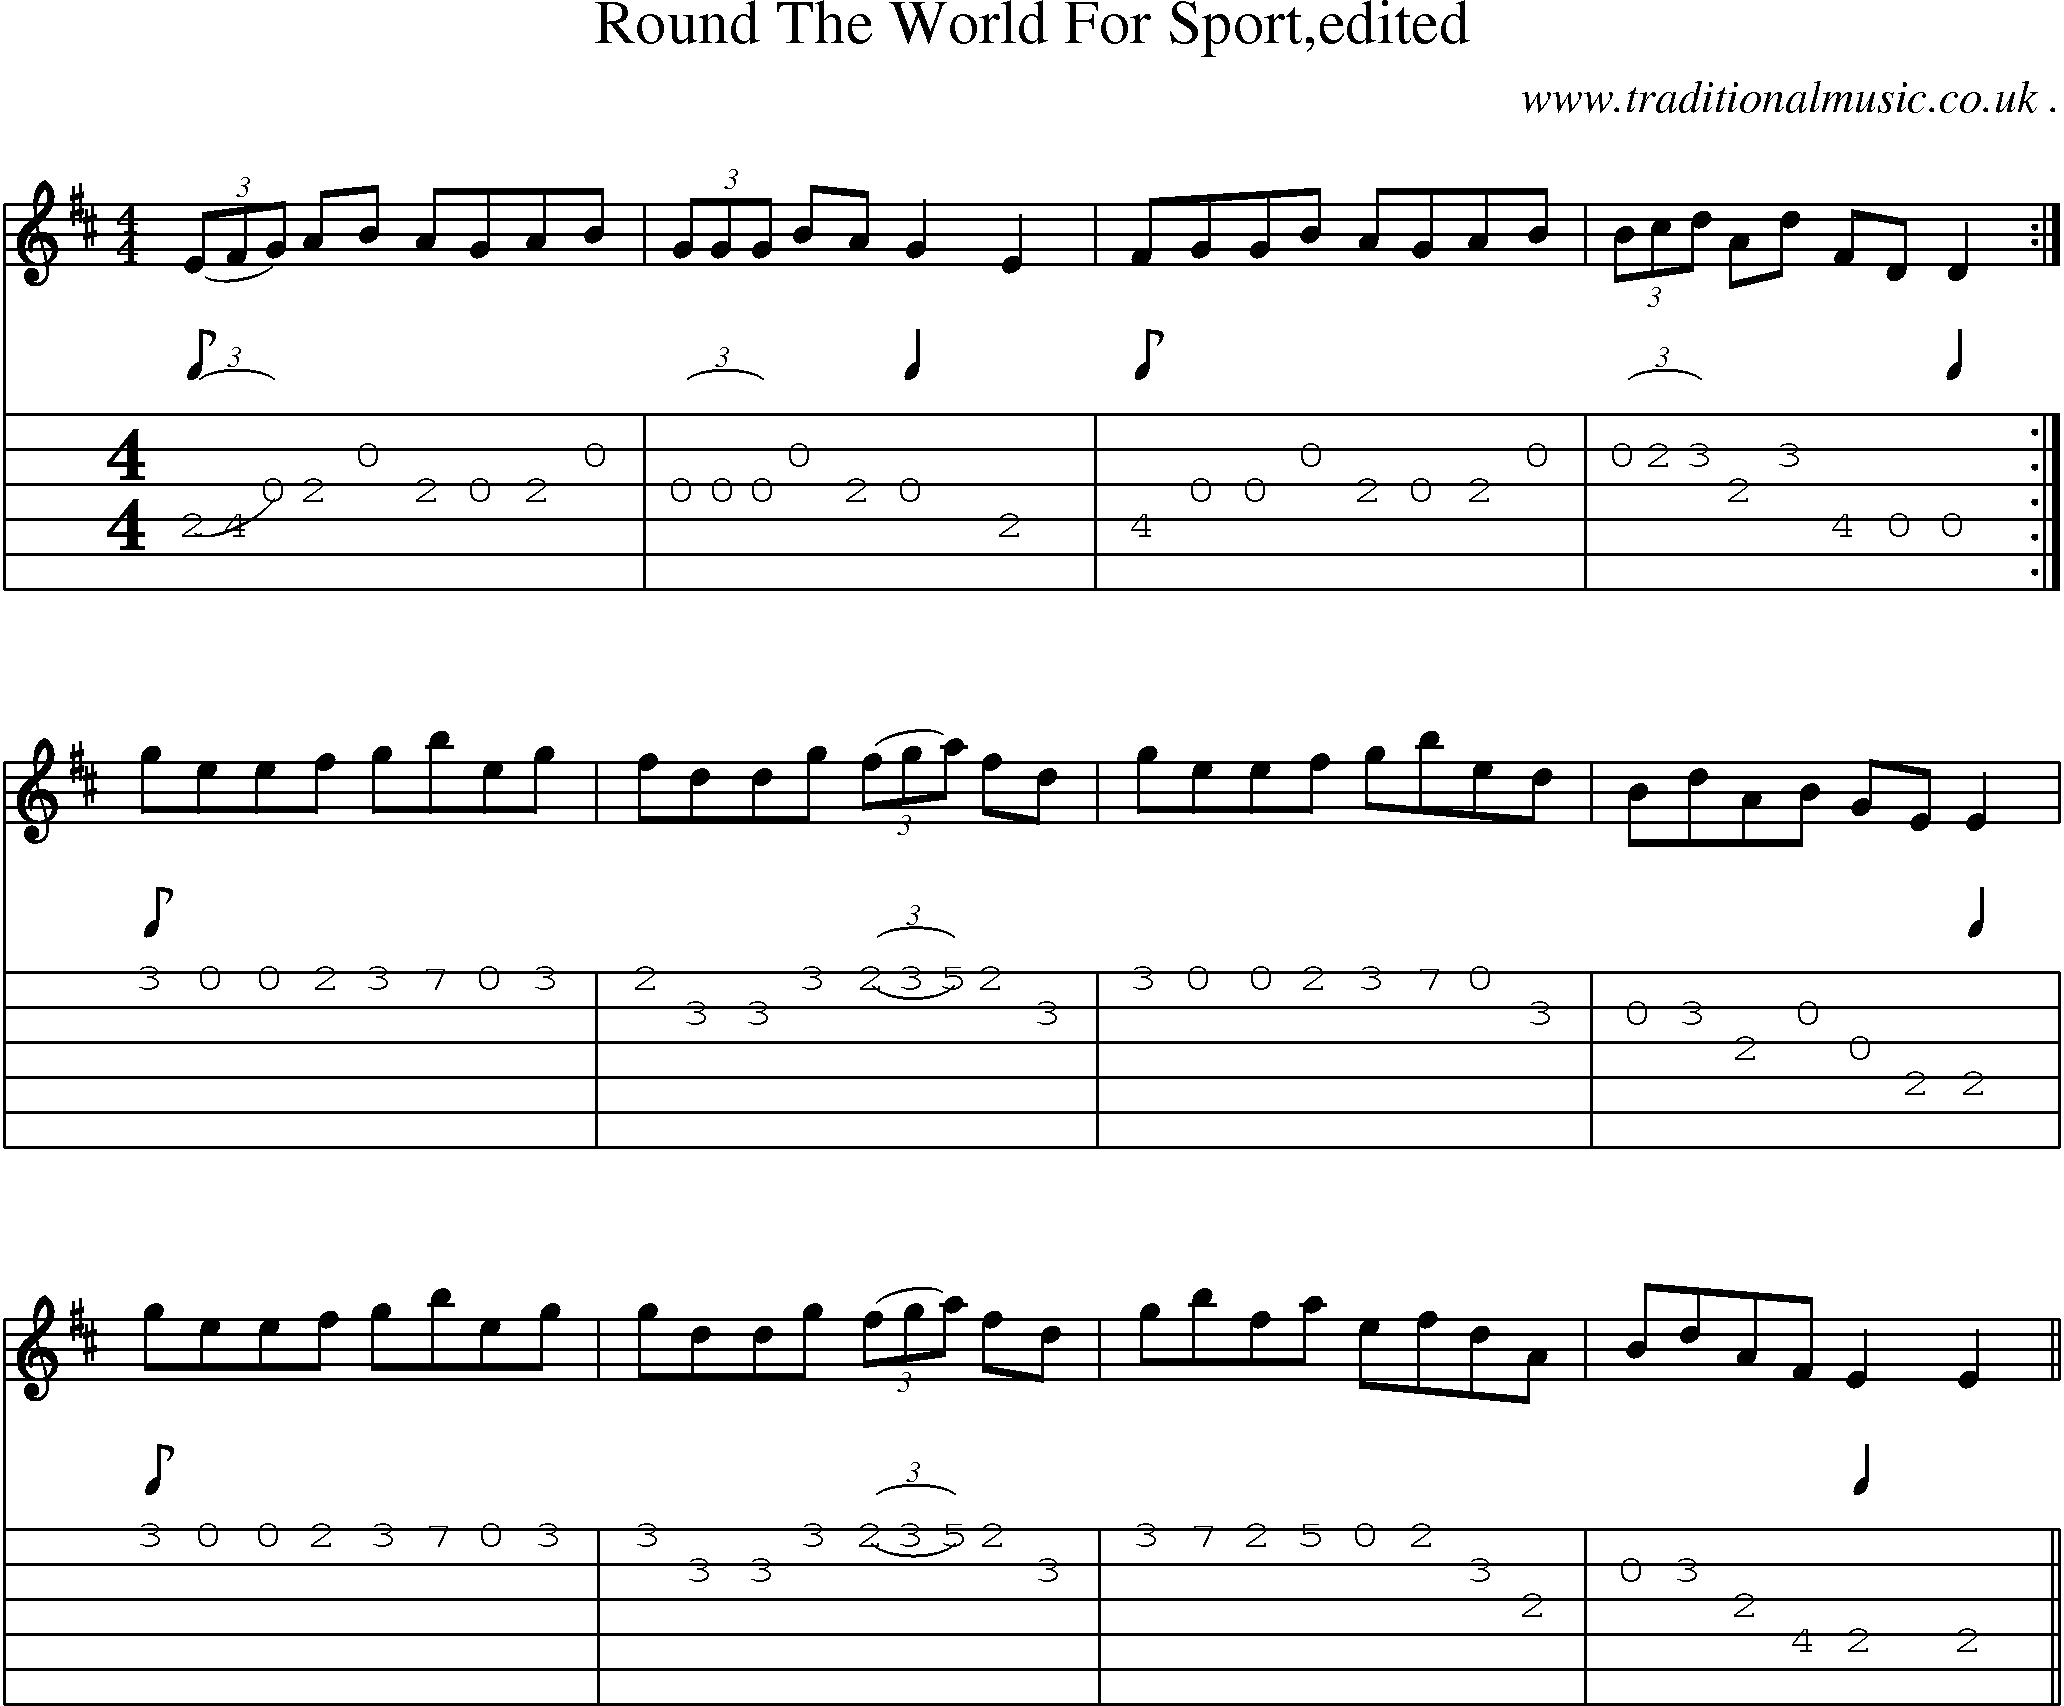 Sheet-Music and Guitar Tabs for Round The World For Sportedited